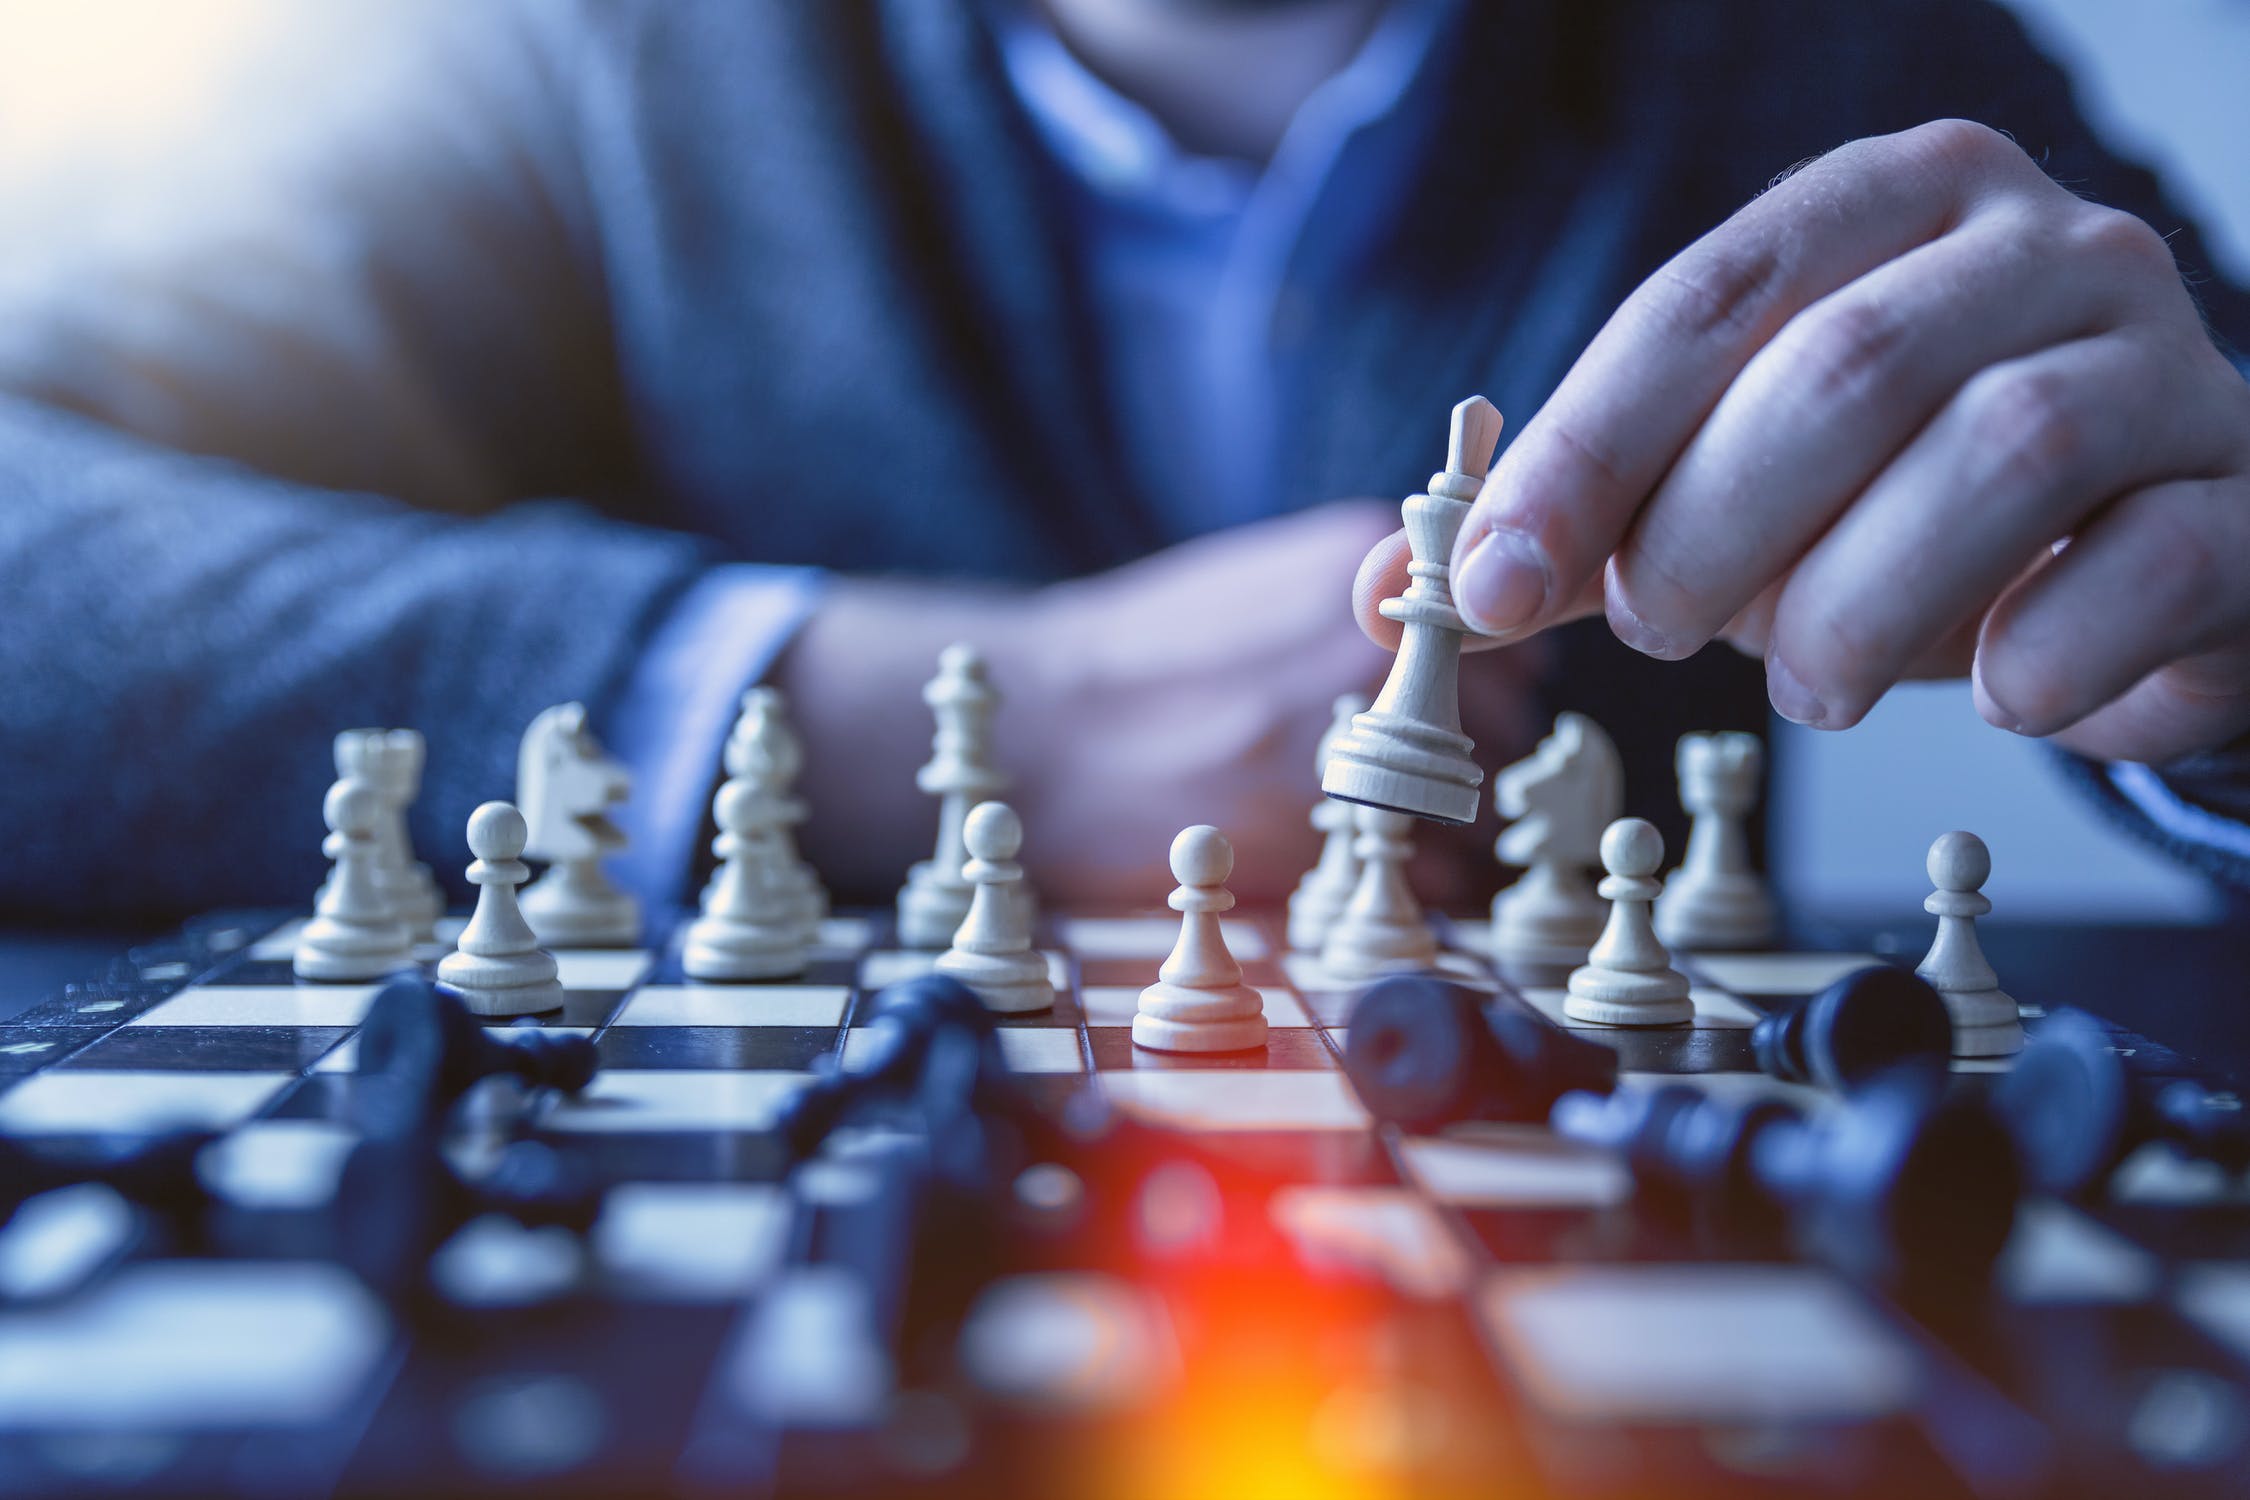 Lessons with a Grandmaster: Enhance your chess strategy and